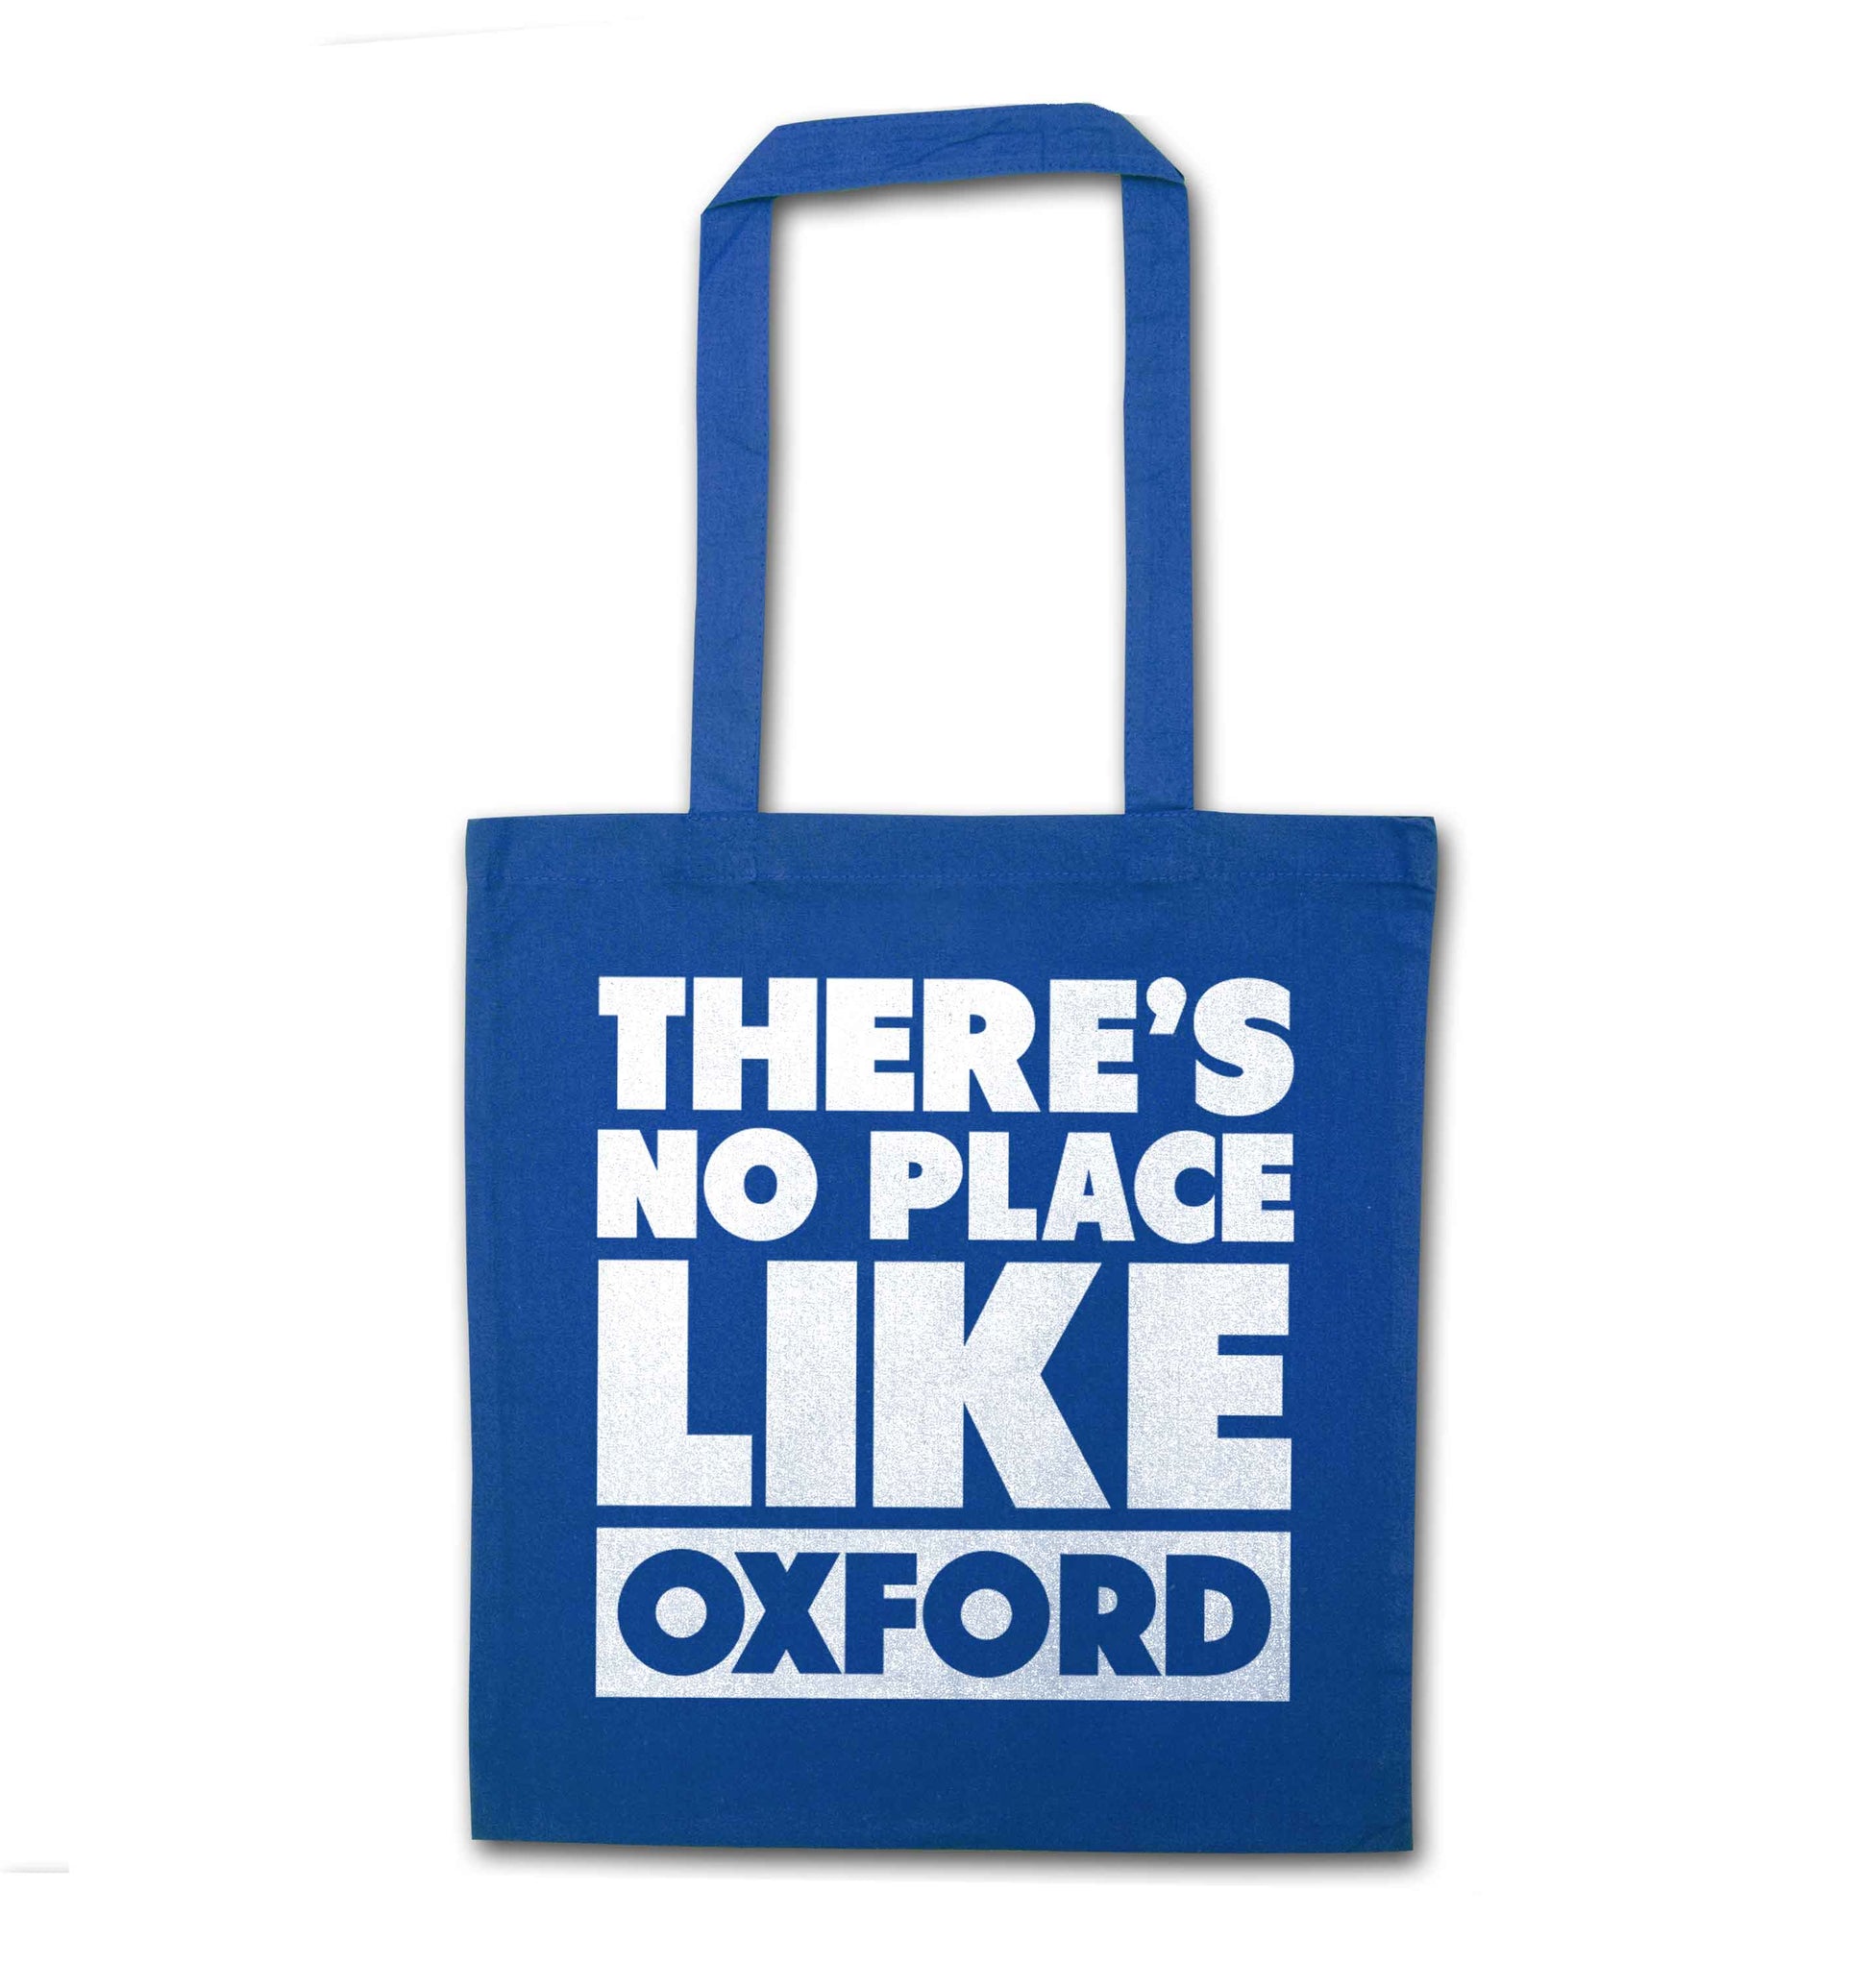 There's no place like Oxford blue tote bag